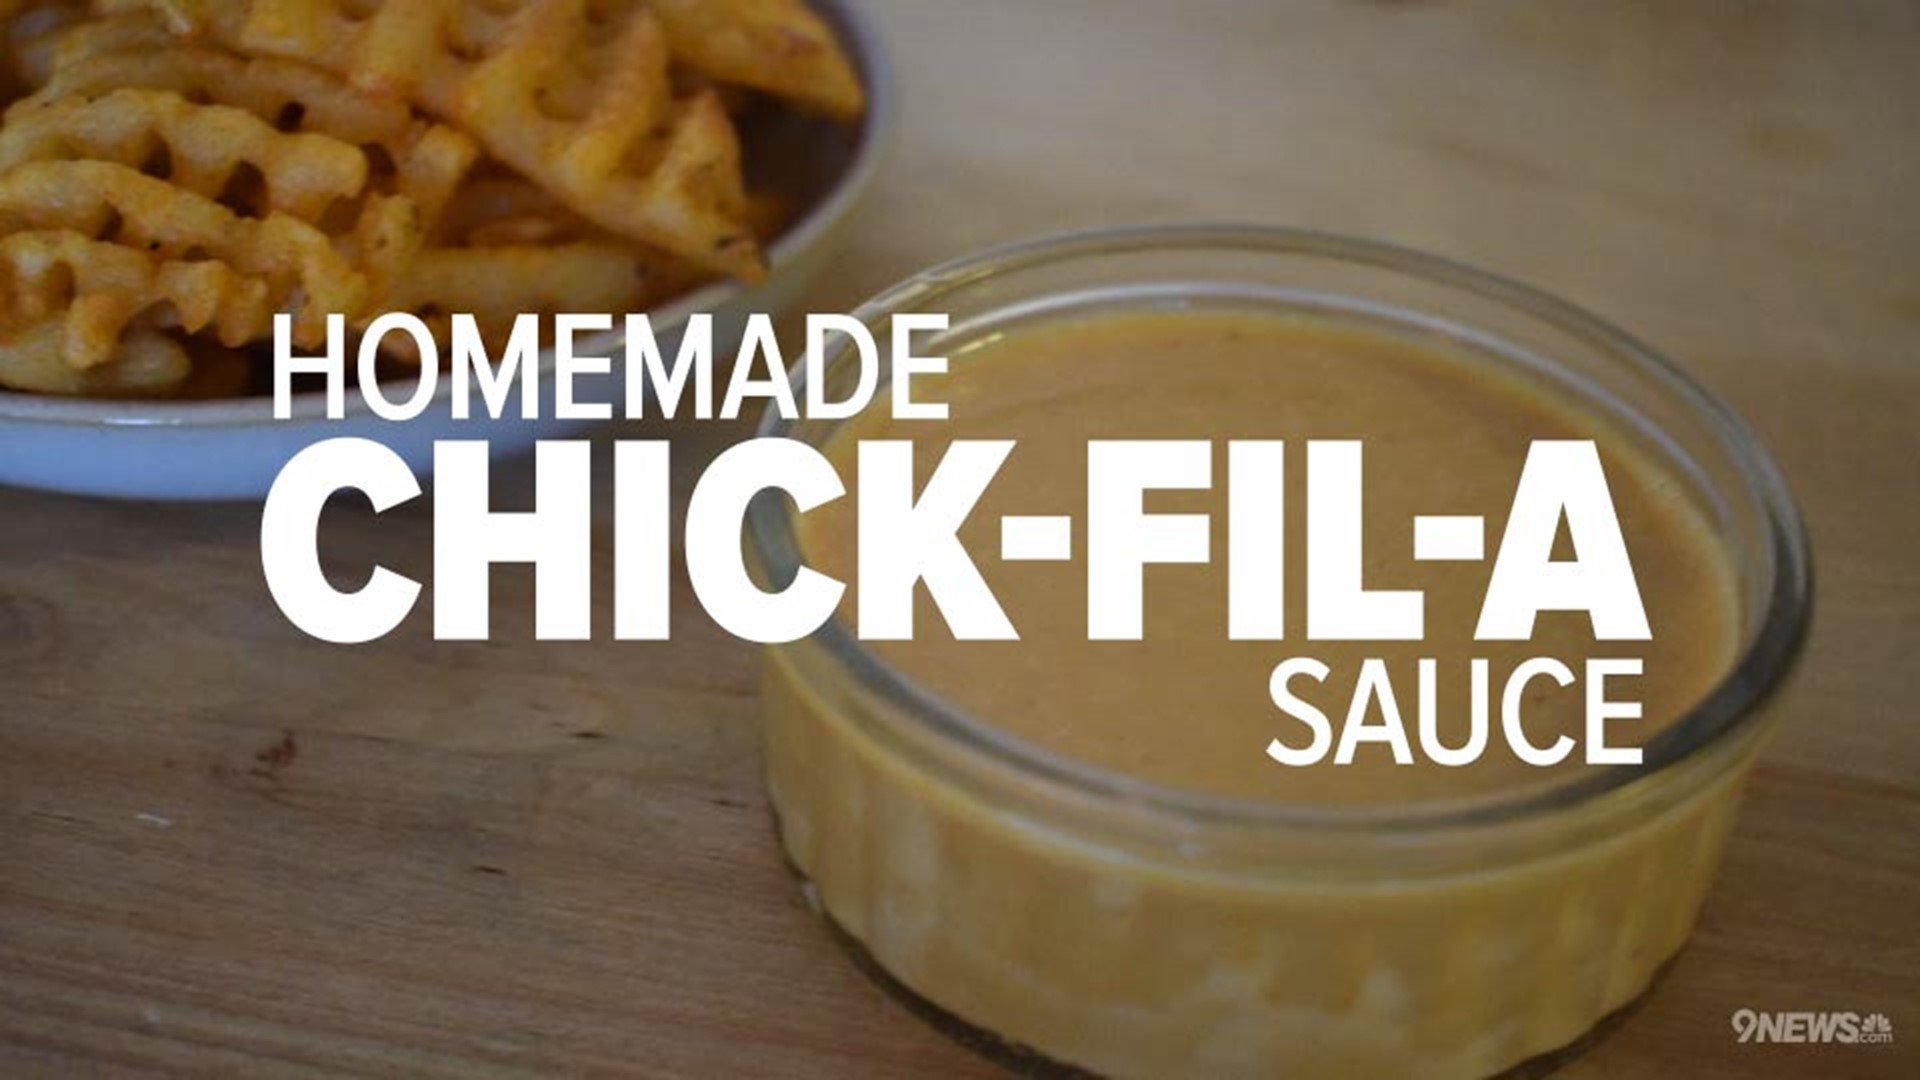 A super simple copycat recipe, so you can slather this addicted sauce on everything.